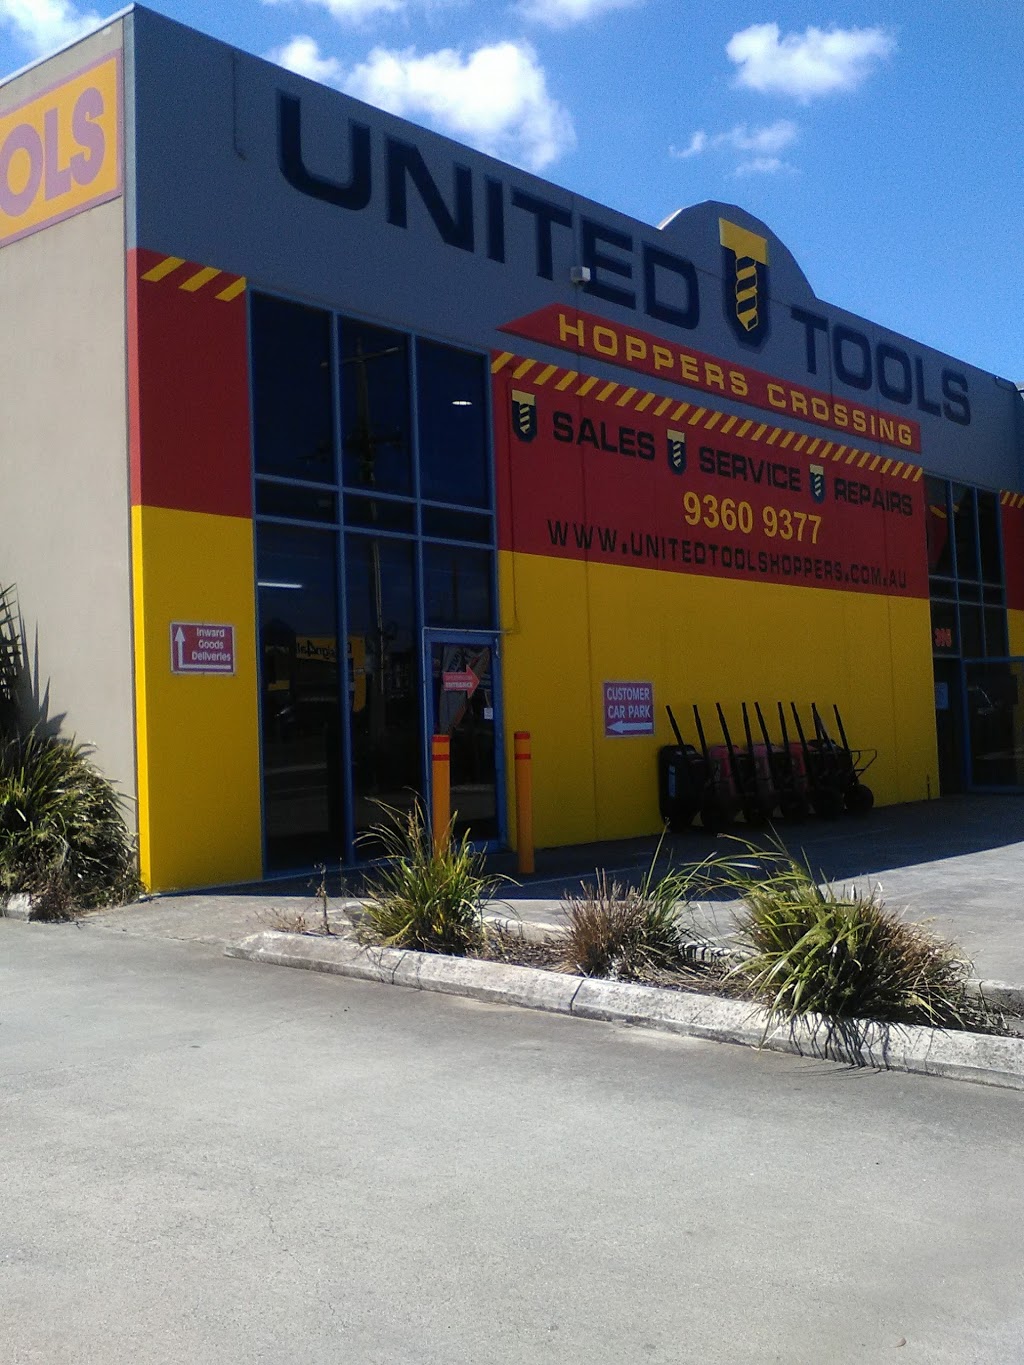 United Tools Hoppers | 1/395-397 Old Geelong Rd, Hoppers Crossing VIC 3029, Australia | Phone: (03) 9360 9377